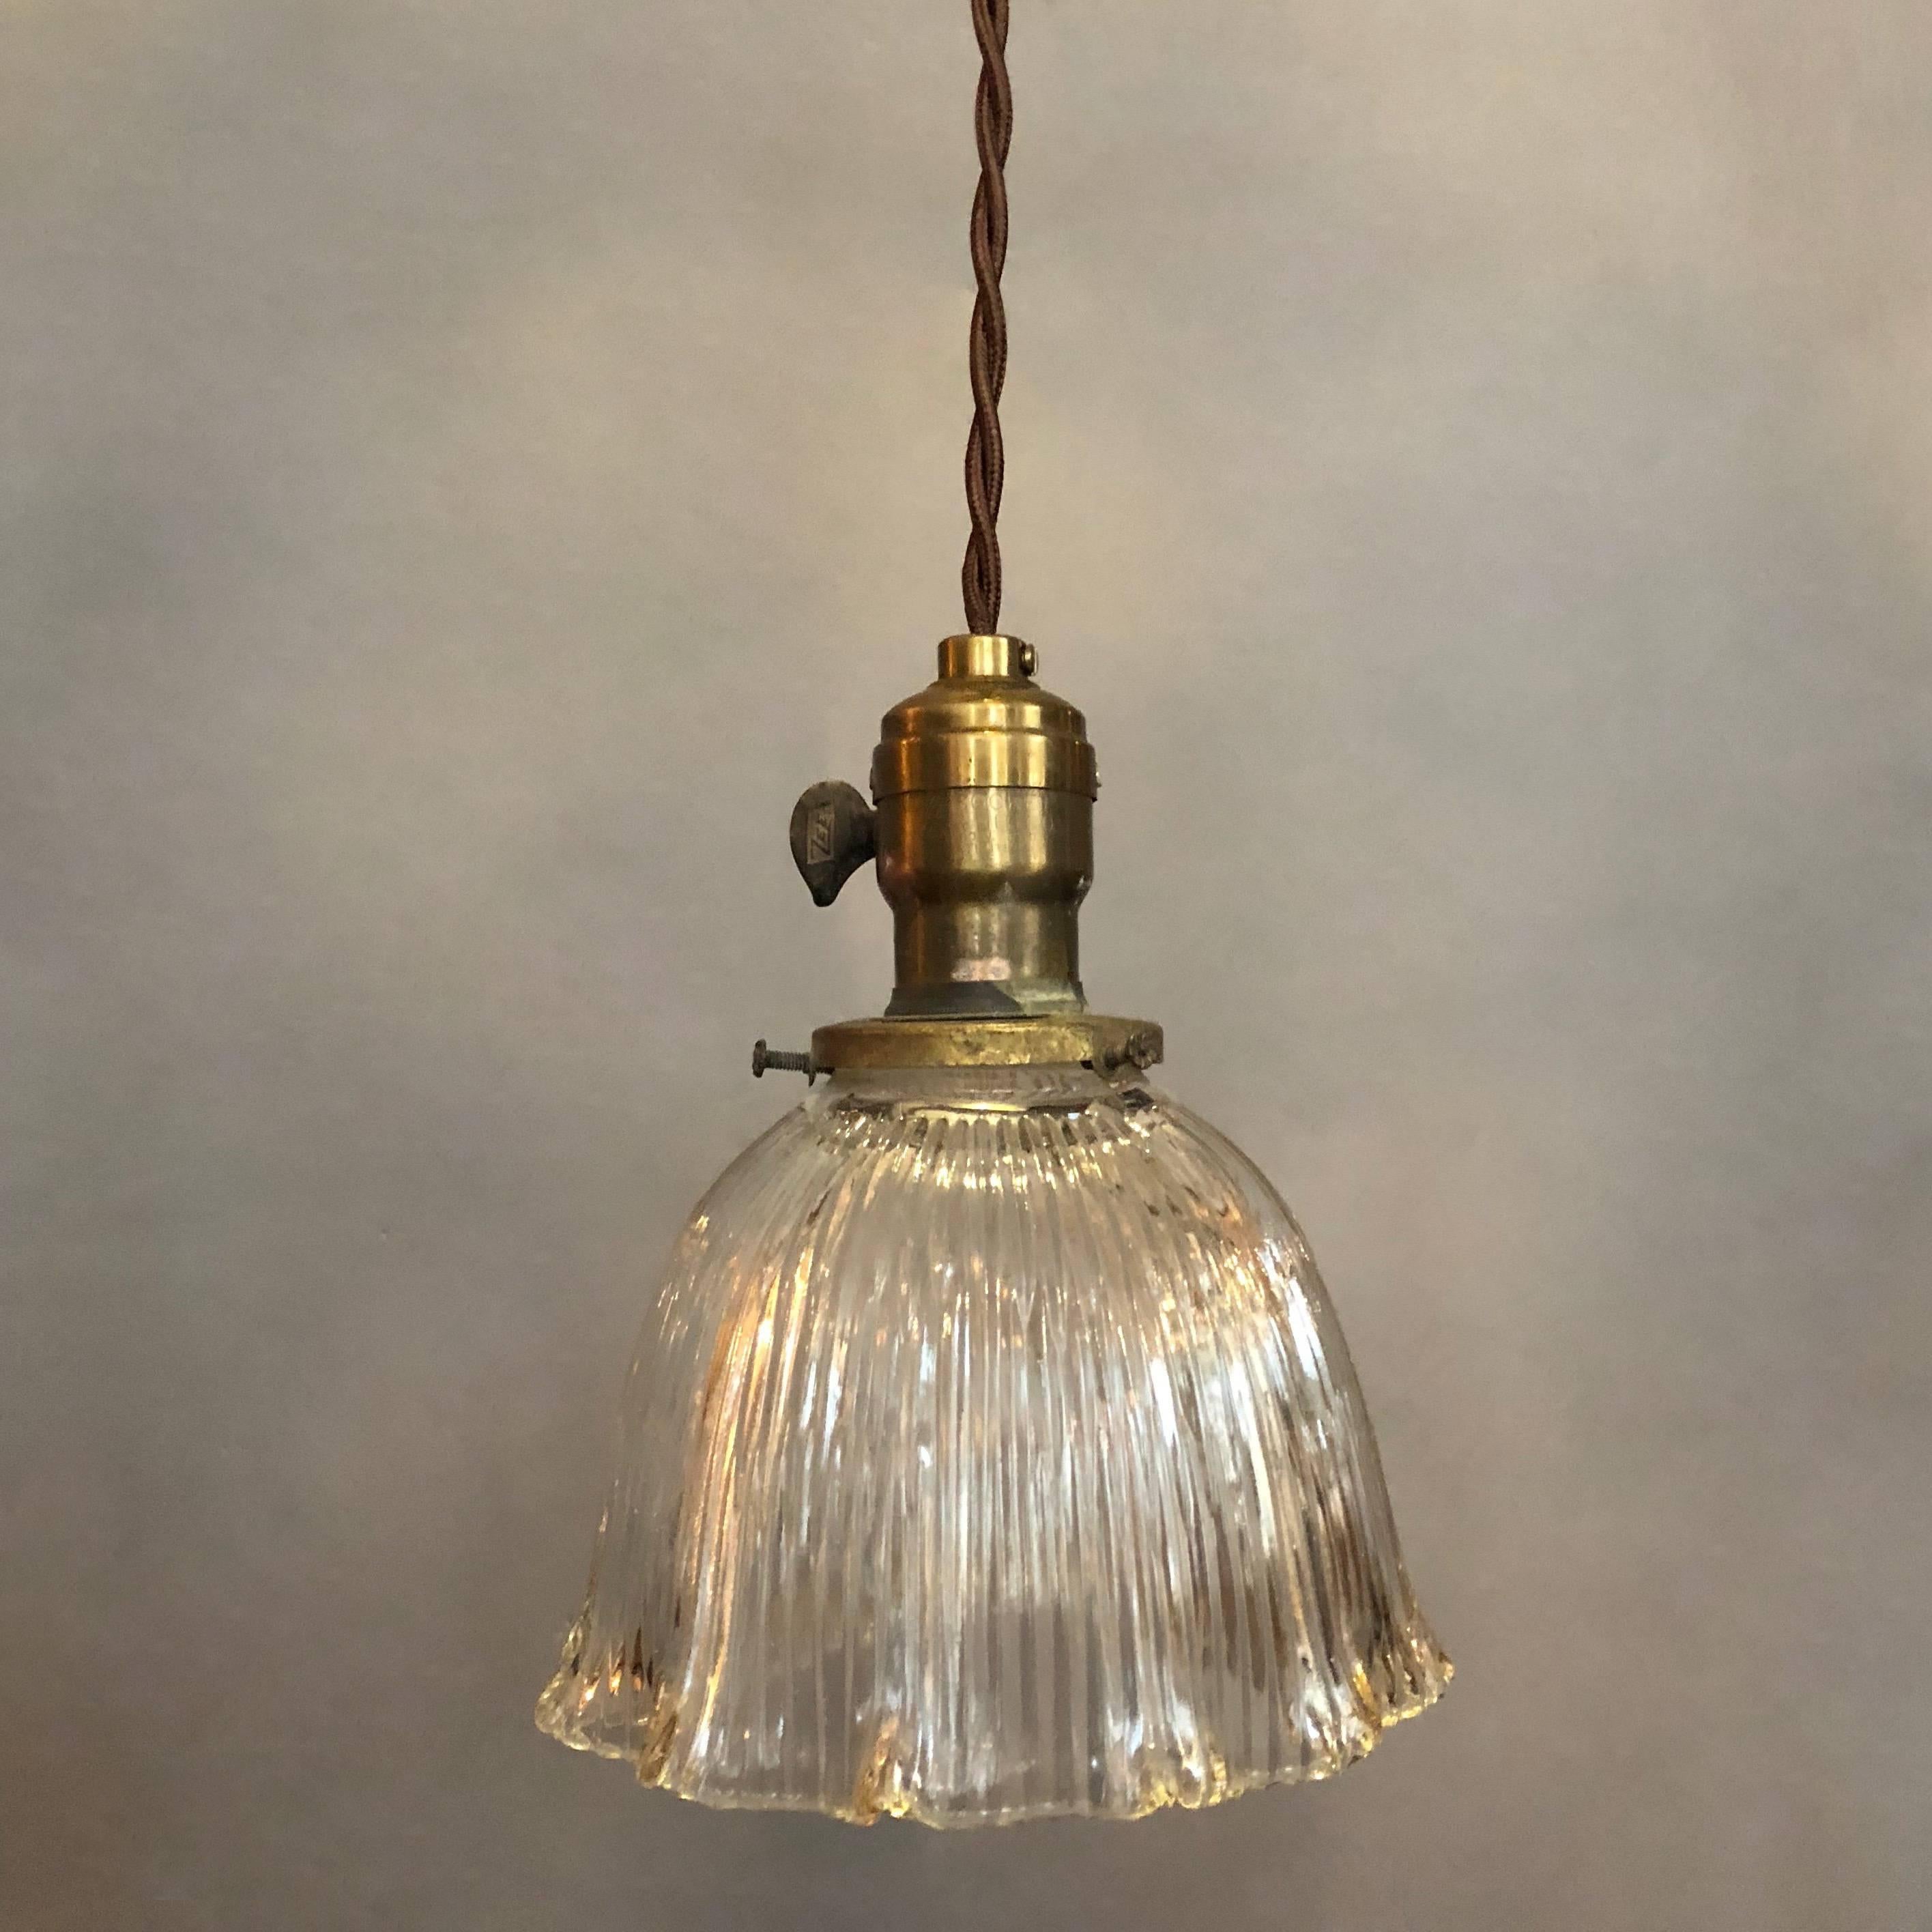 Industrial, early 20th century, Holophane glass pendant light features a deeply cut, prismatic, dome or bell shaped shade with scalloped edge, brass fitter with paddle switch is newly wired with 48in. of braided cloth cord to accept a 200 watt